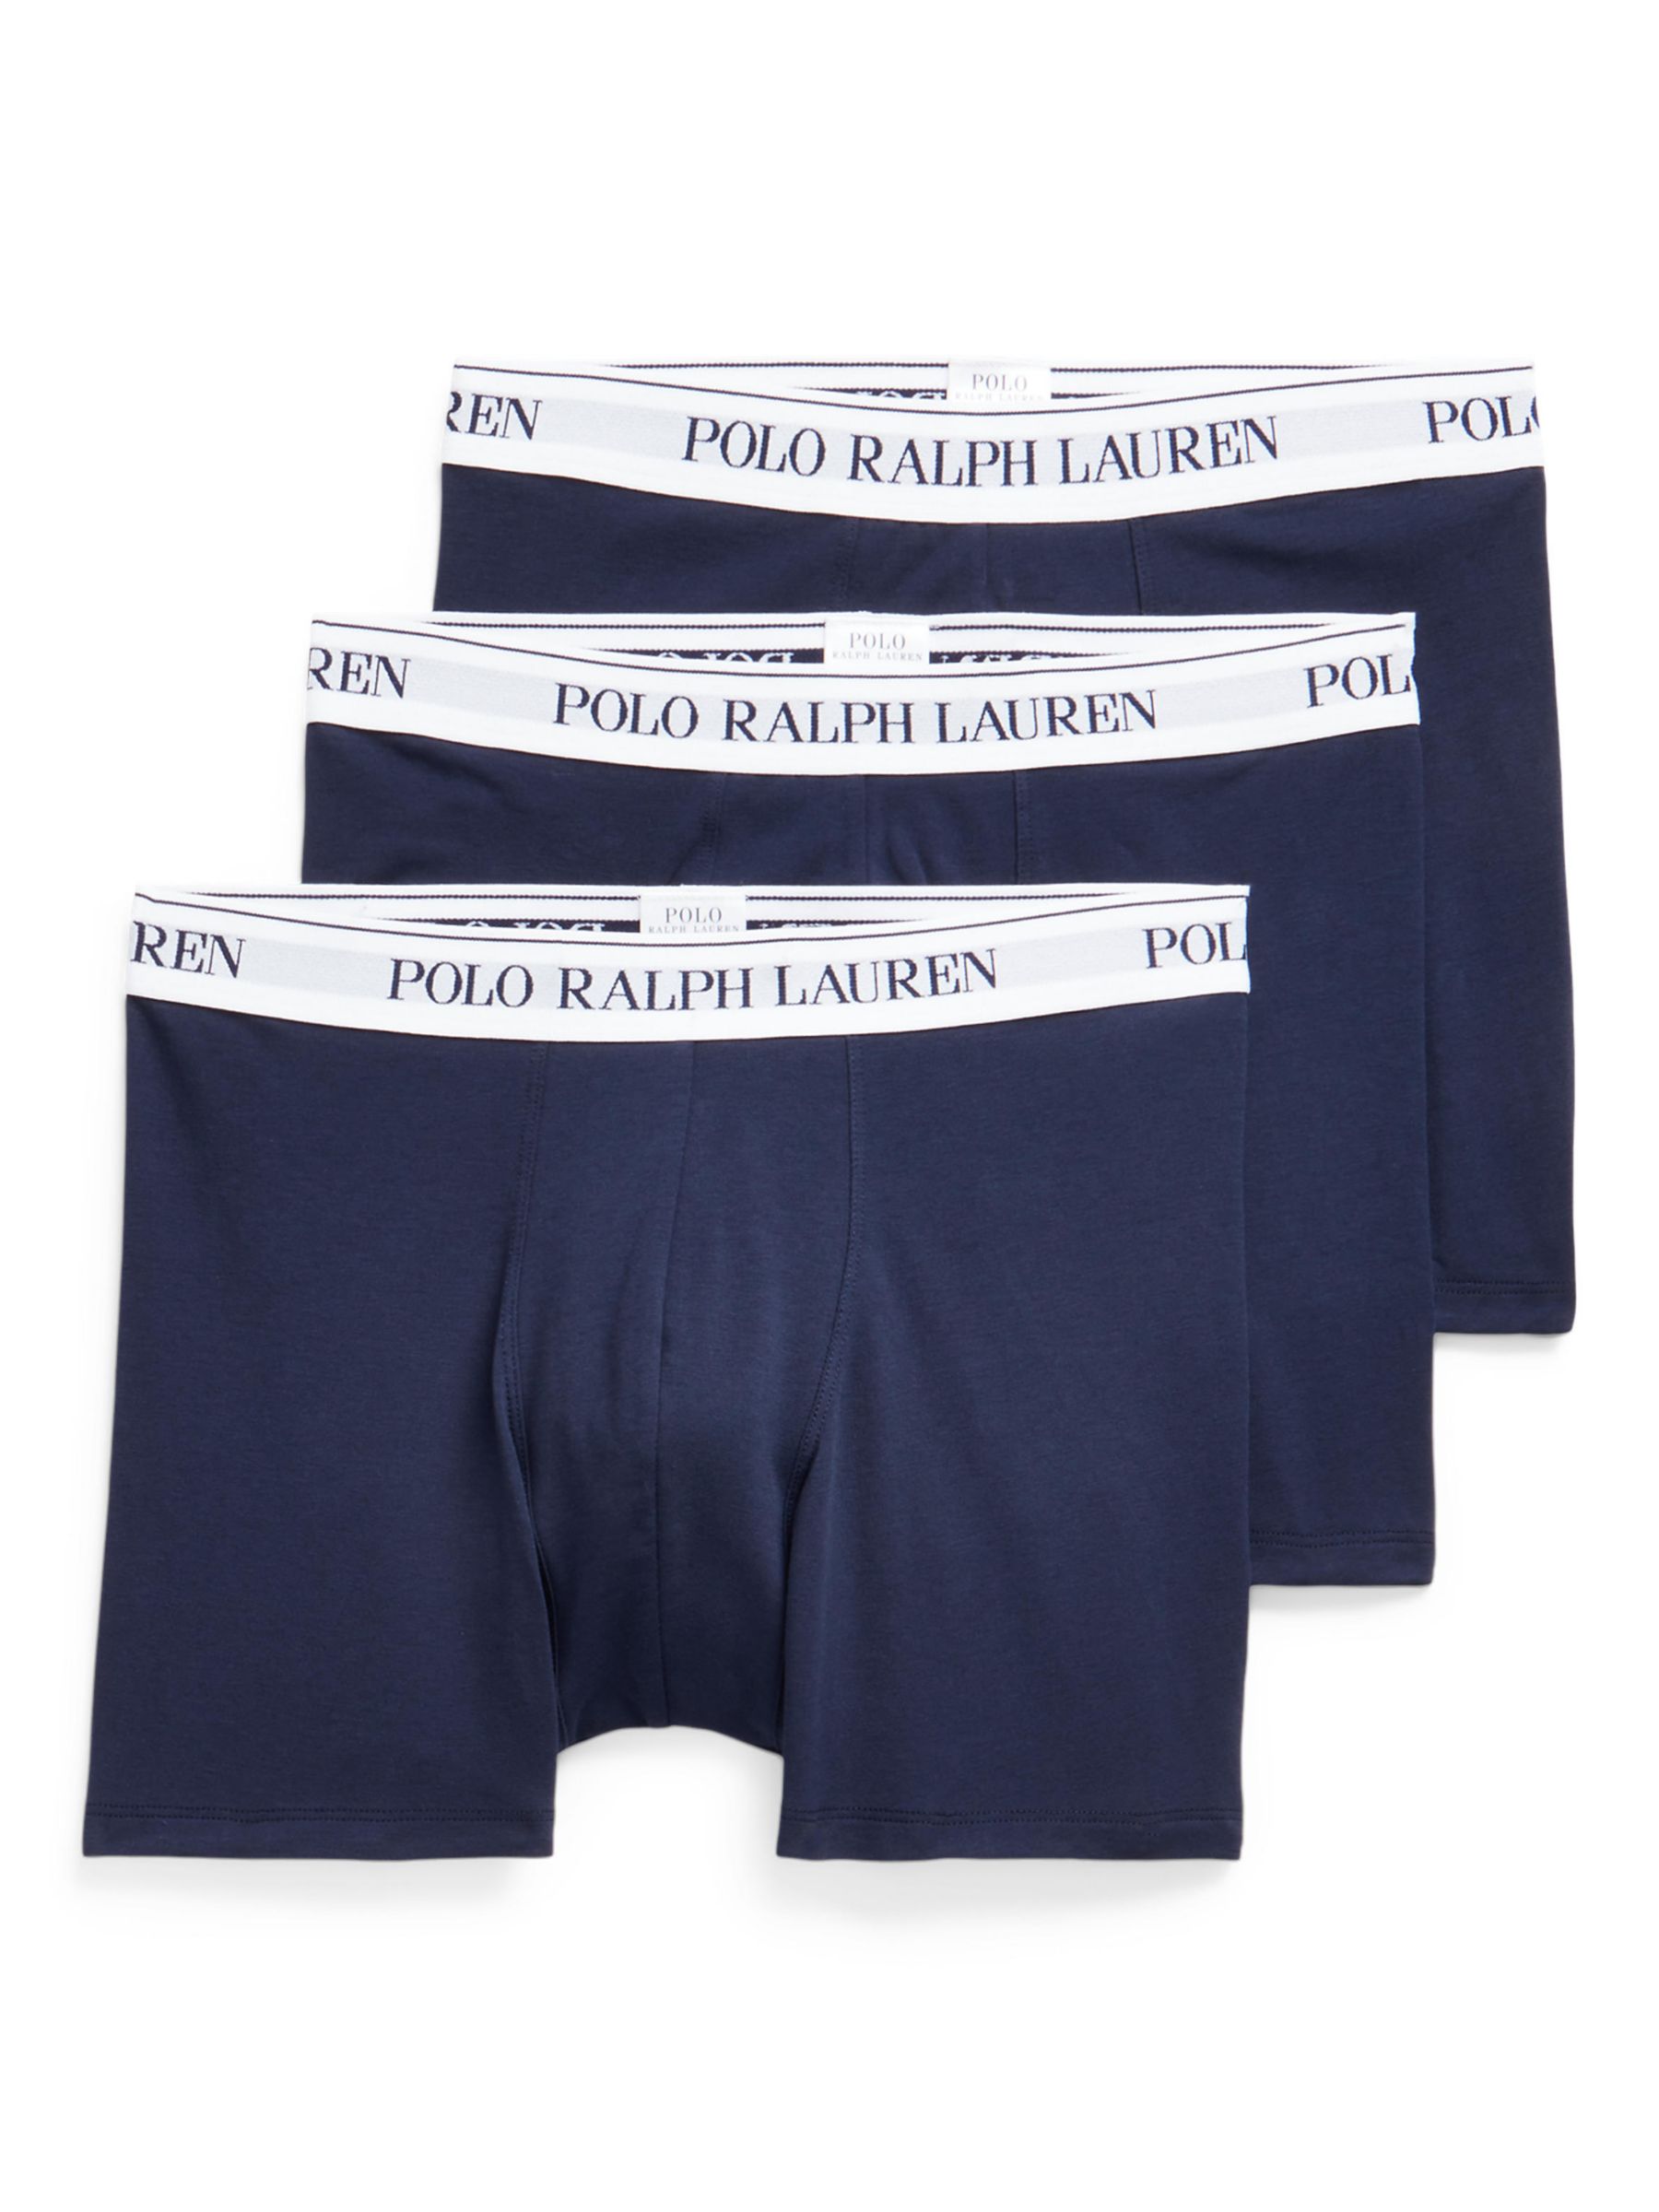 Polo Ralph Lauren 3 pack low rise brief with logo waistband in navy / blue  / pink